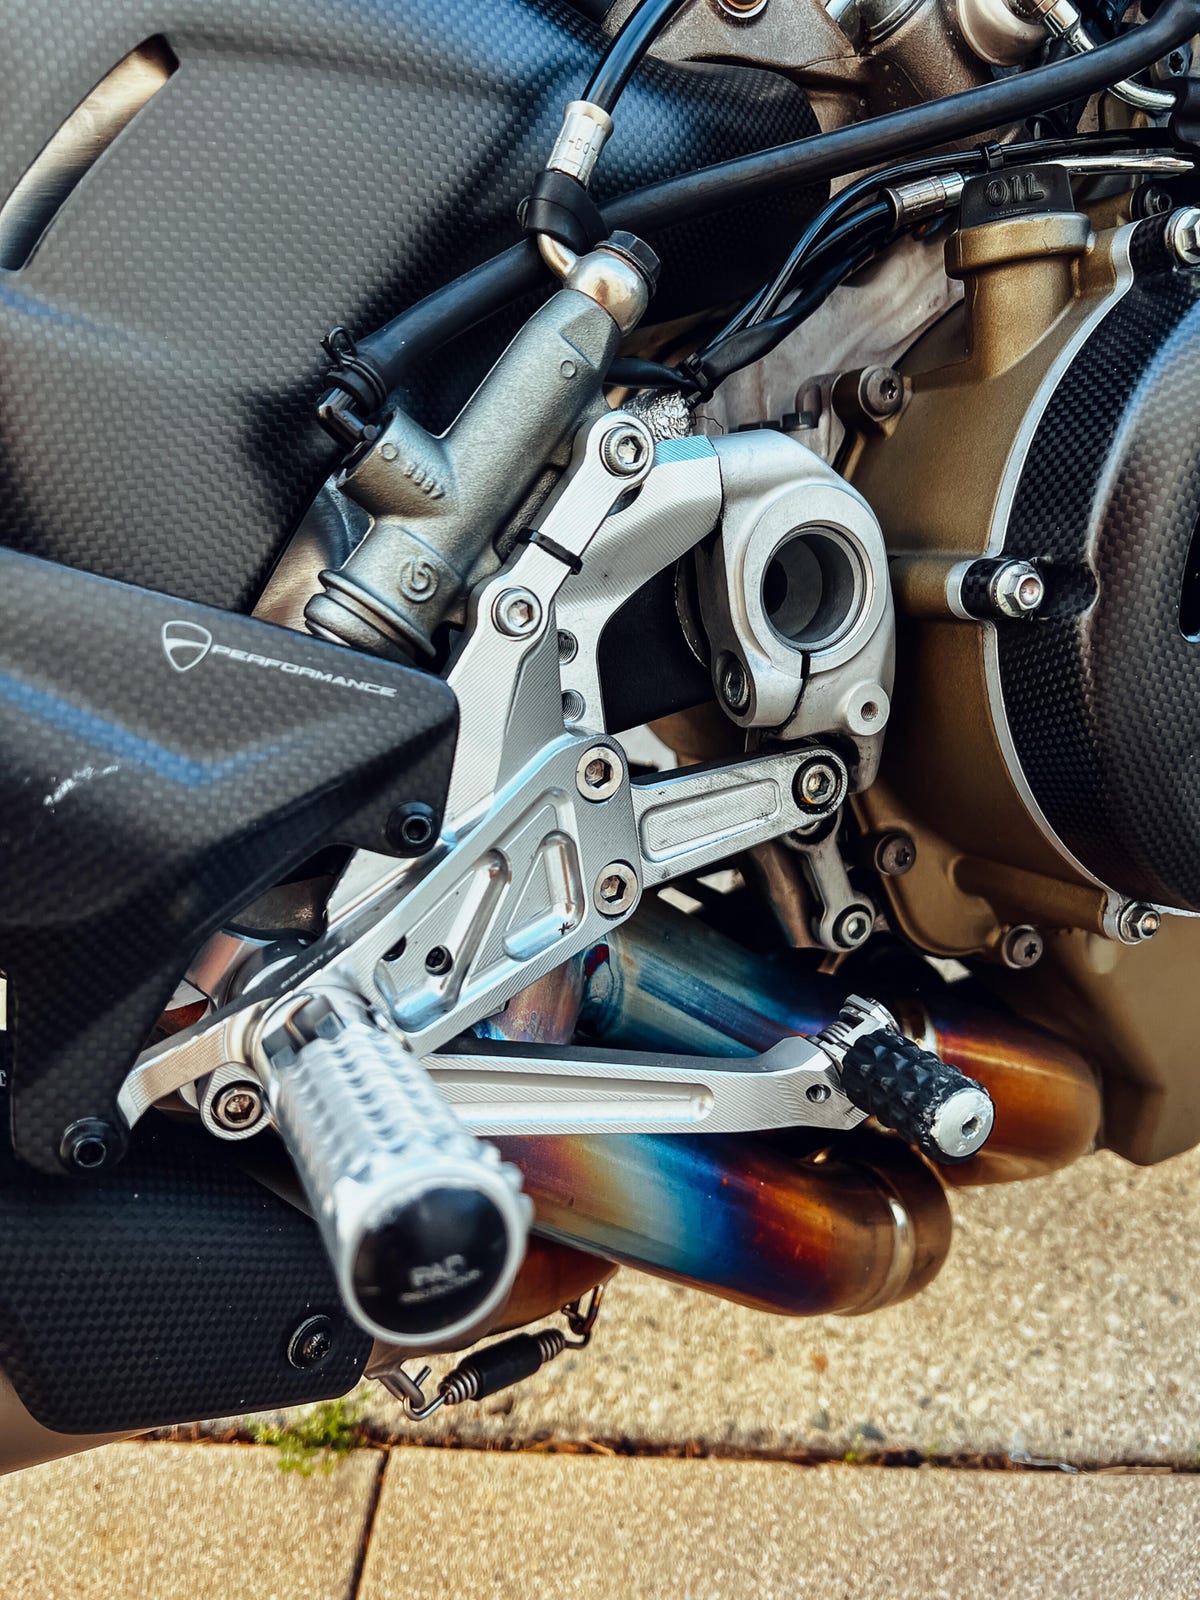 Ducati Streetfighter V4 S with accessories